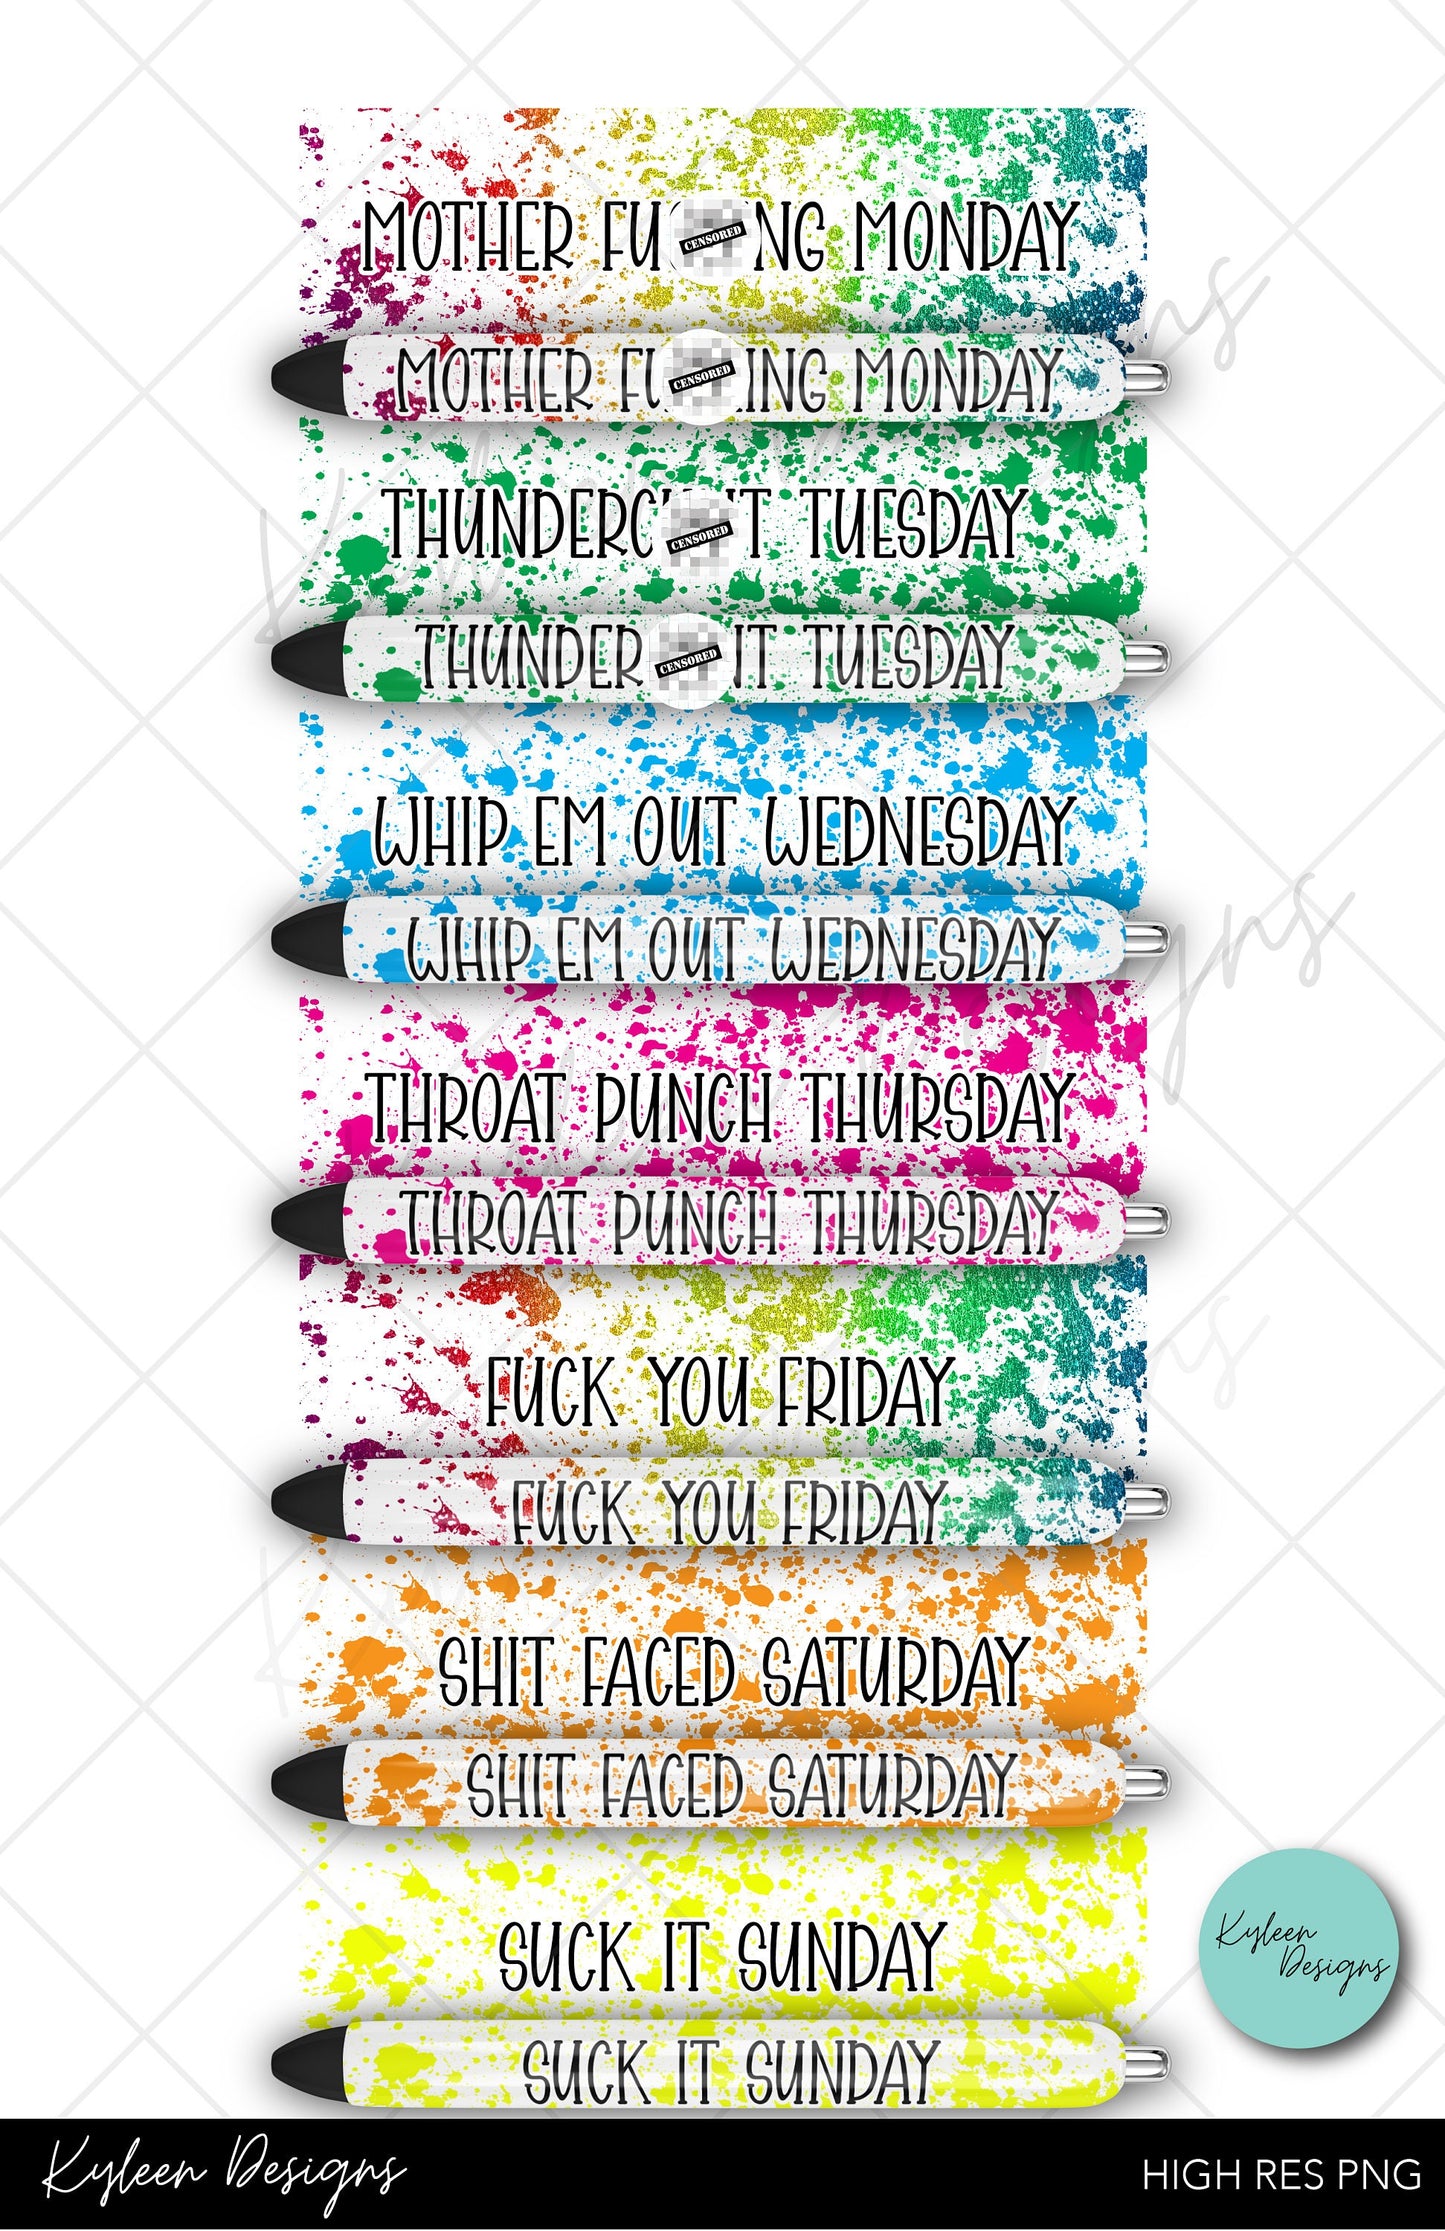 DAYS of the week power washpen wraps for waterslide high RES PNG- all white